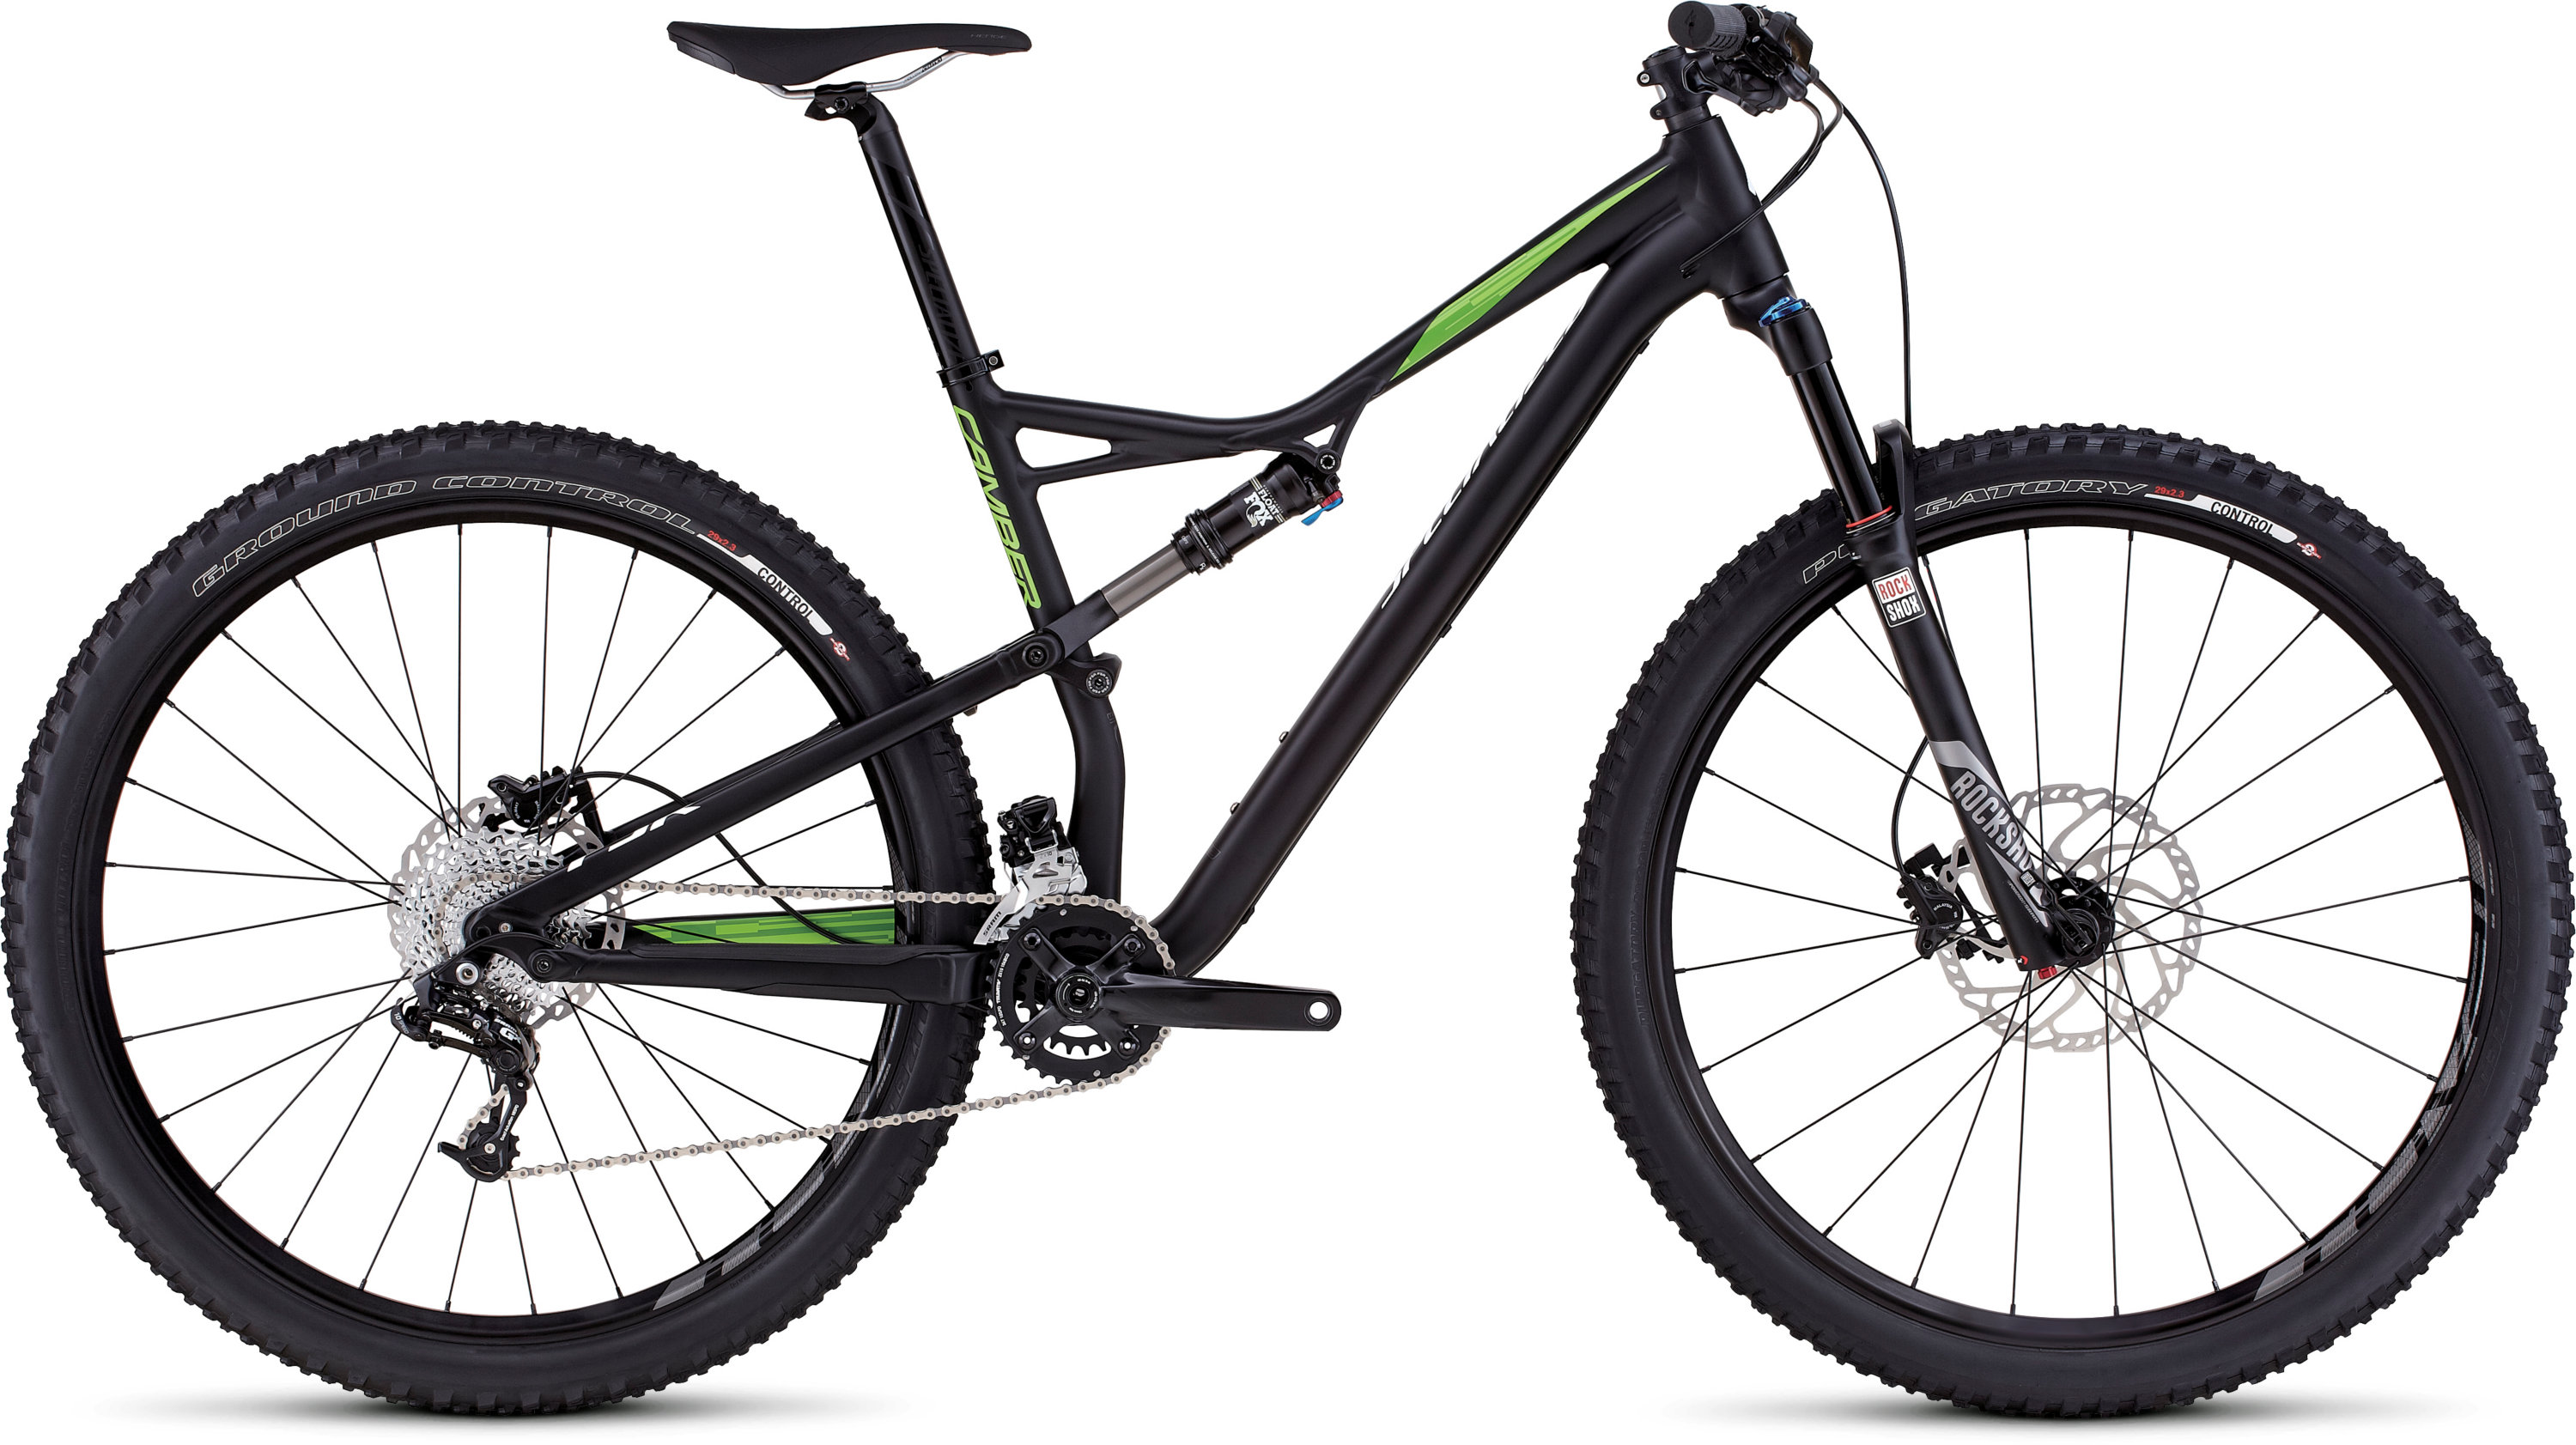 2017 specialized camber fsr